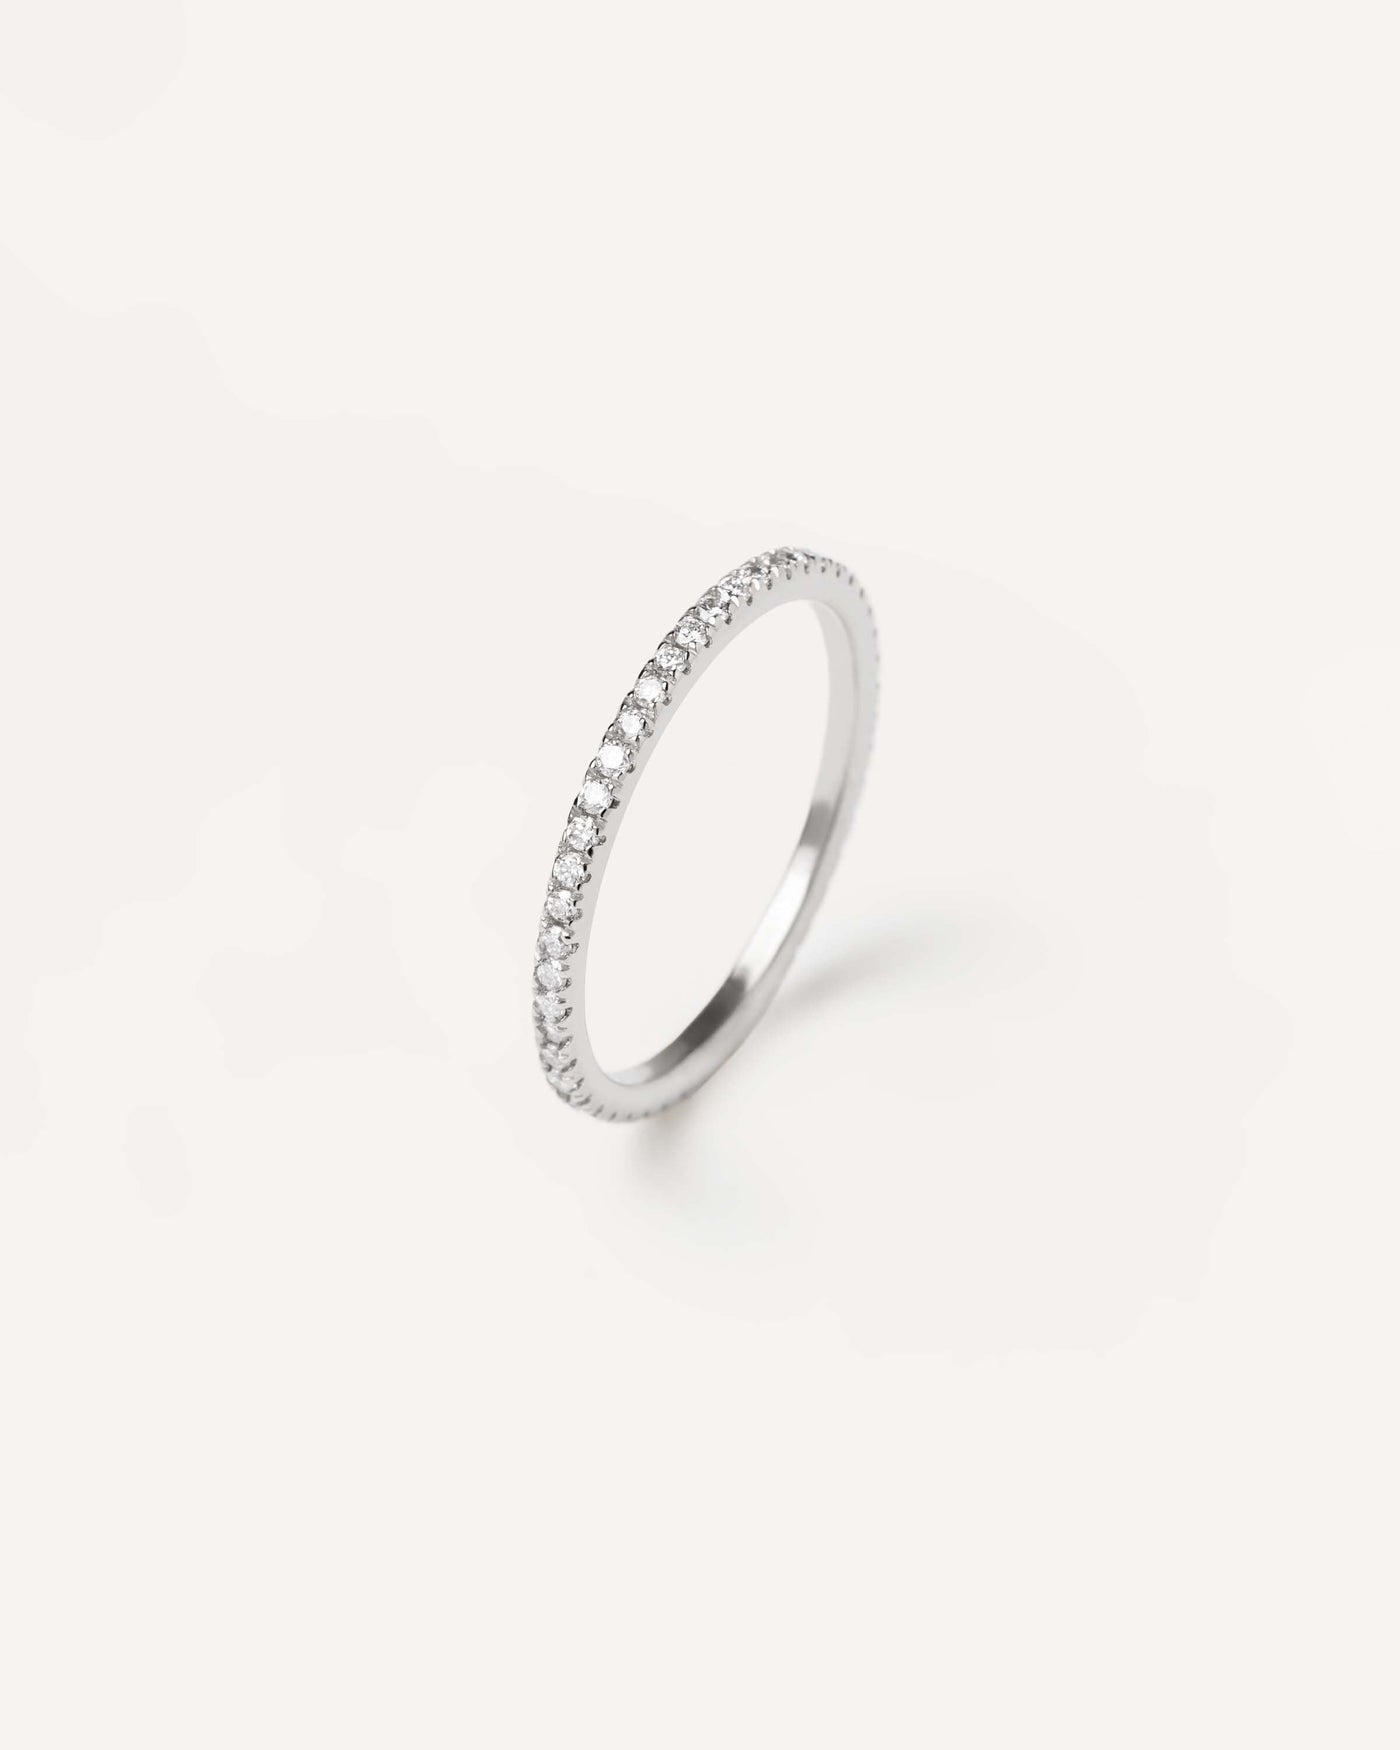 2024 Selection | Diamonds and White Gold Eternity Mini Ring. 18K white gold eternity ring, set with small lab-grown diamonds, equaling 0.51 carats. Get the latest arrival from PDPAOLA. Place your order safely and get this Best Seller. Free Shipping.